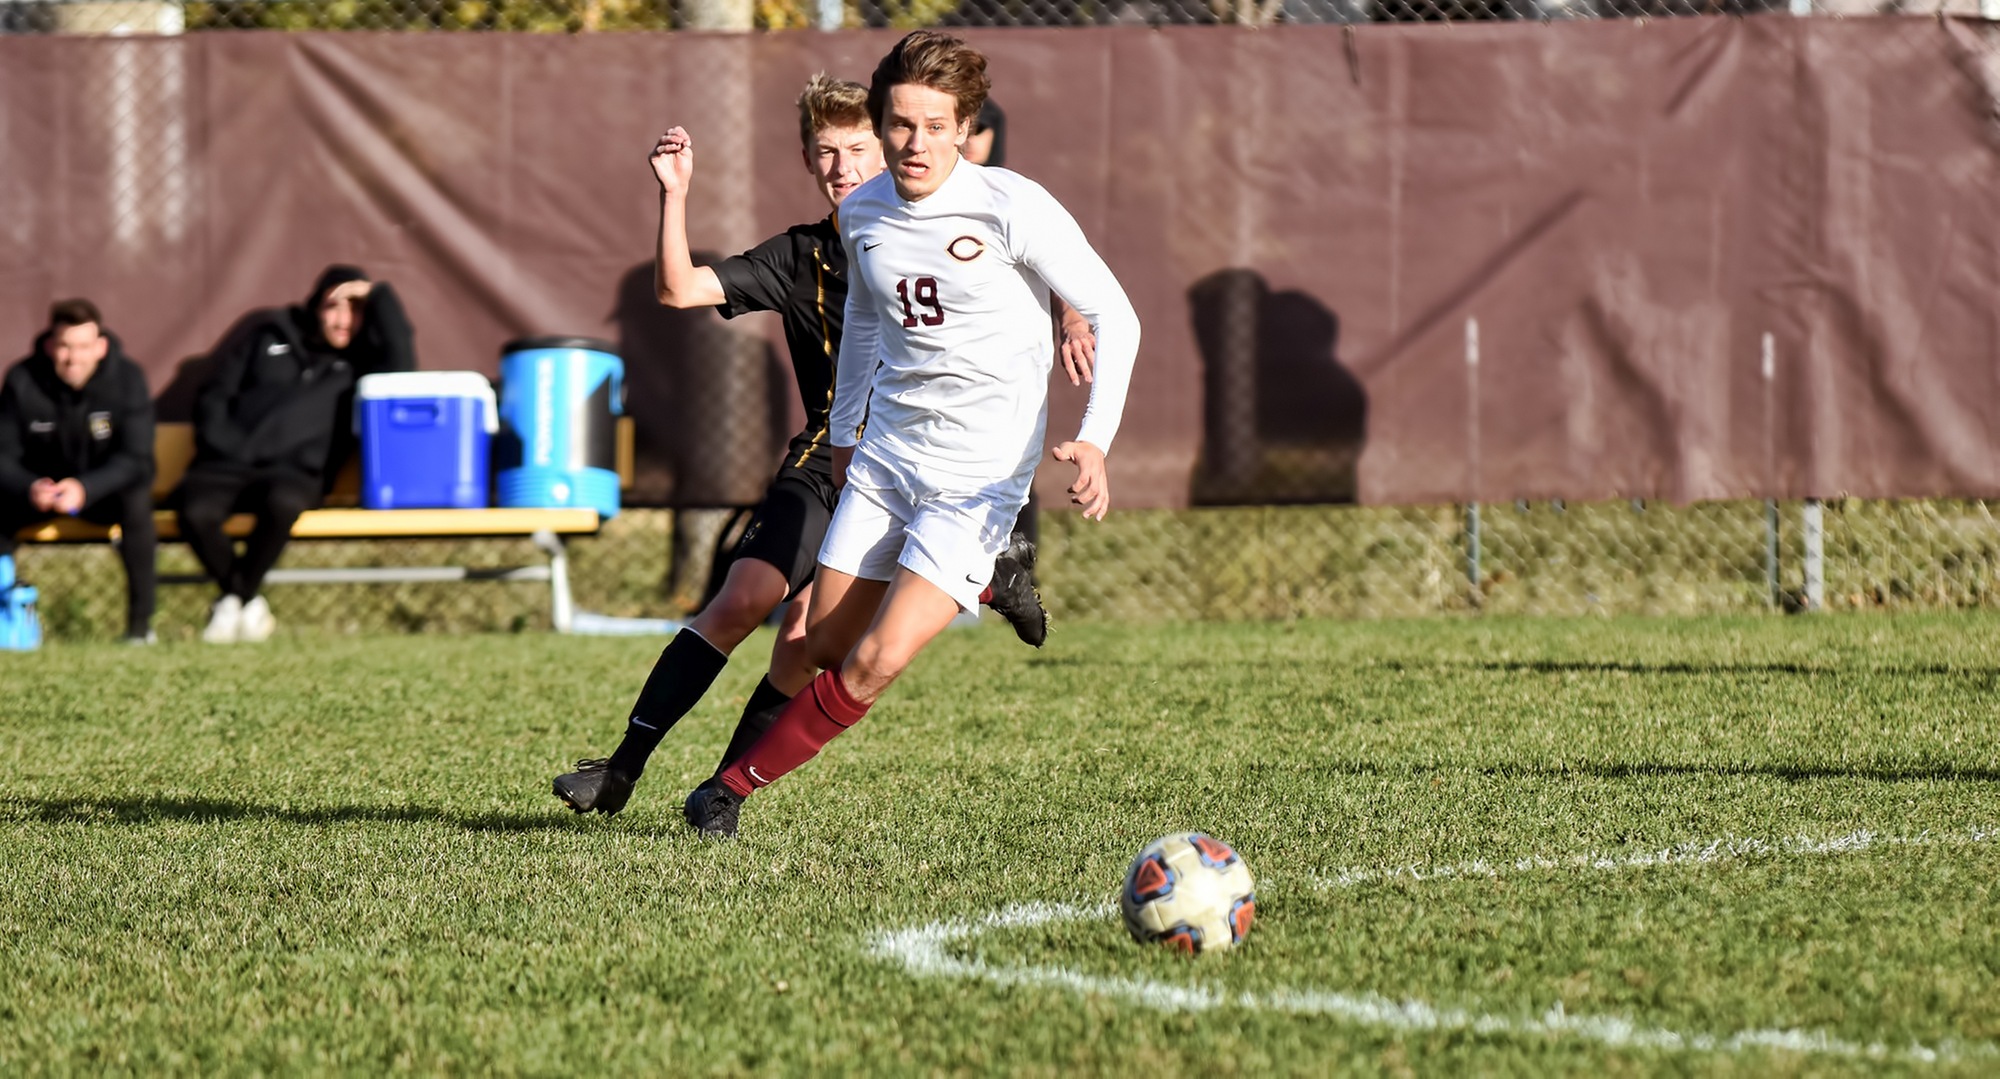 Freshman Sondre Rygg chases the ball in the middle of the field during the second half of the Cobbers' game with Gustavus.